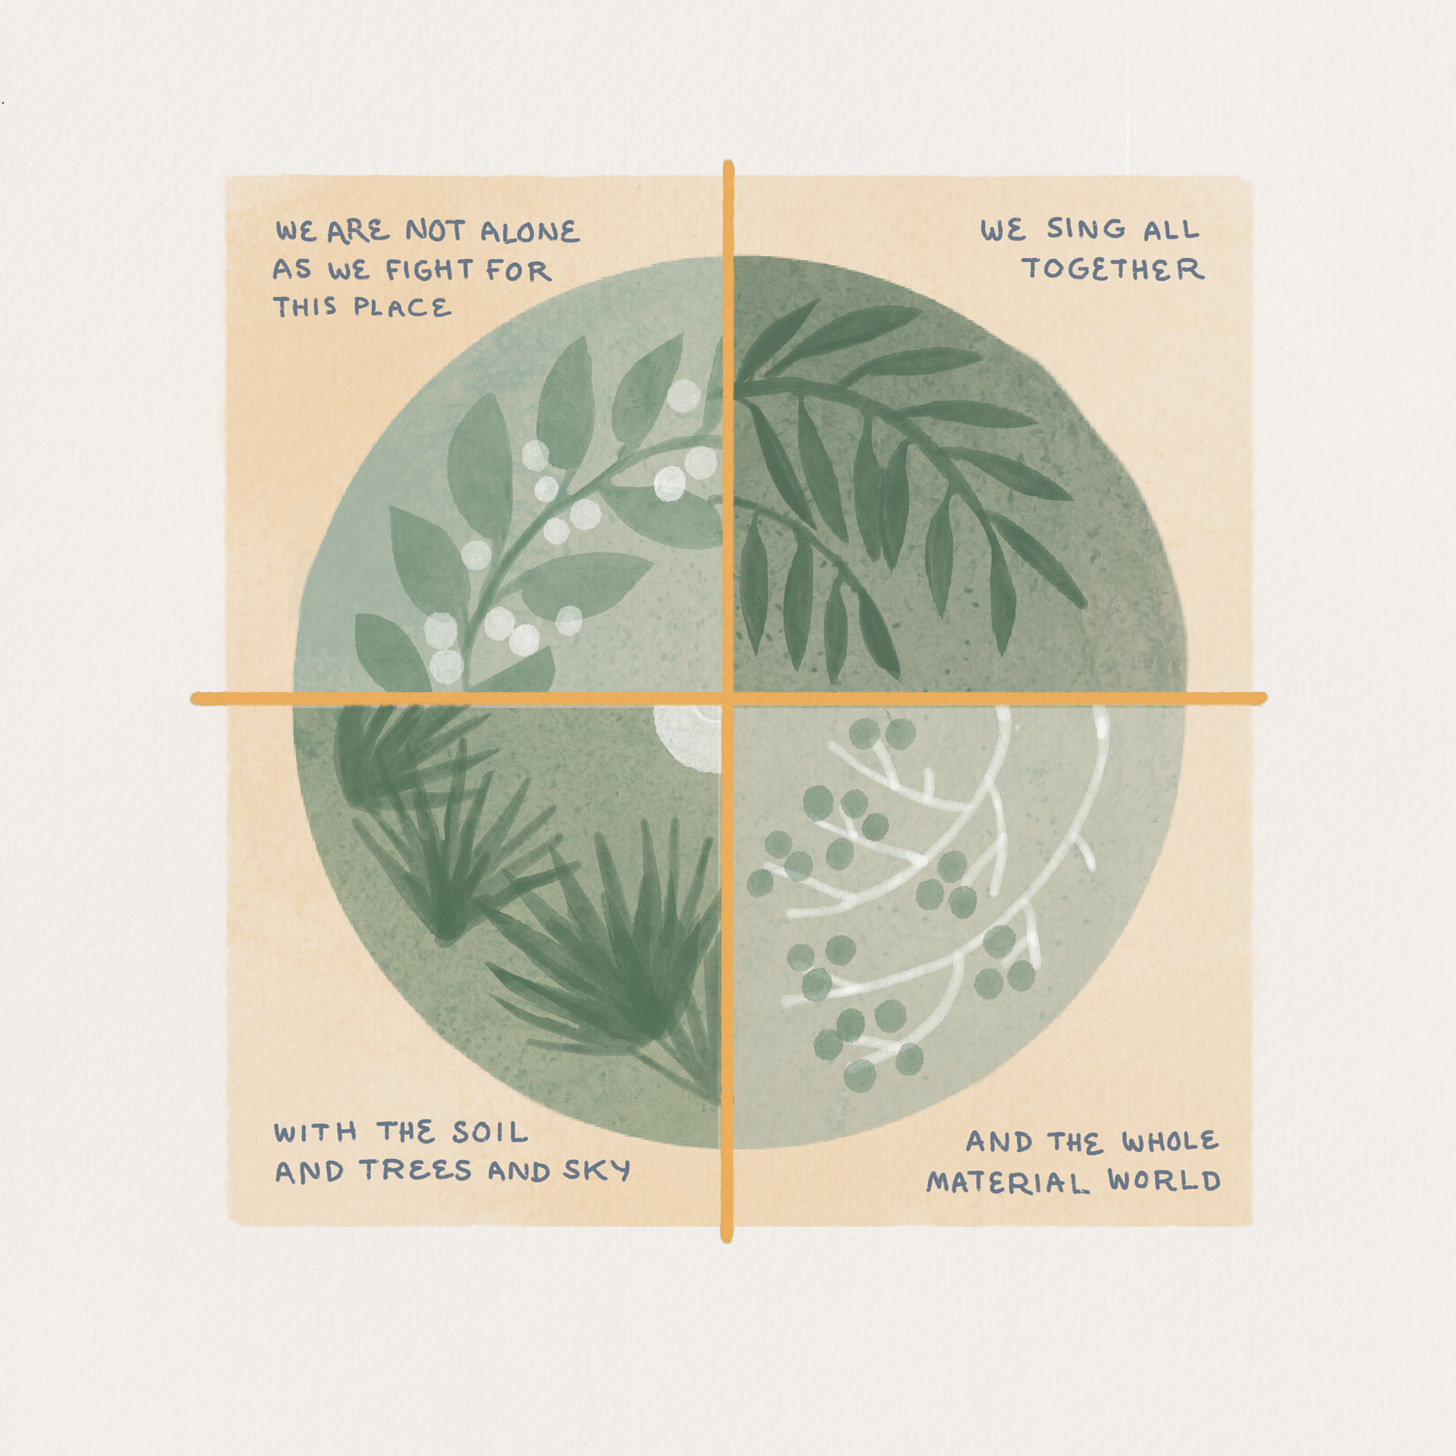 Text: We are not alone as we fight for this place. We sing all together with the soil, and trees, and sky, and the whole material world. Image: Various green plants arranged in a circle